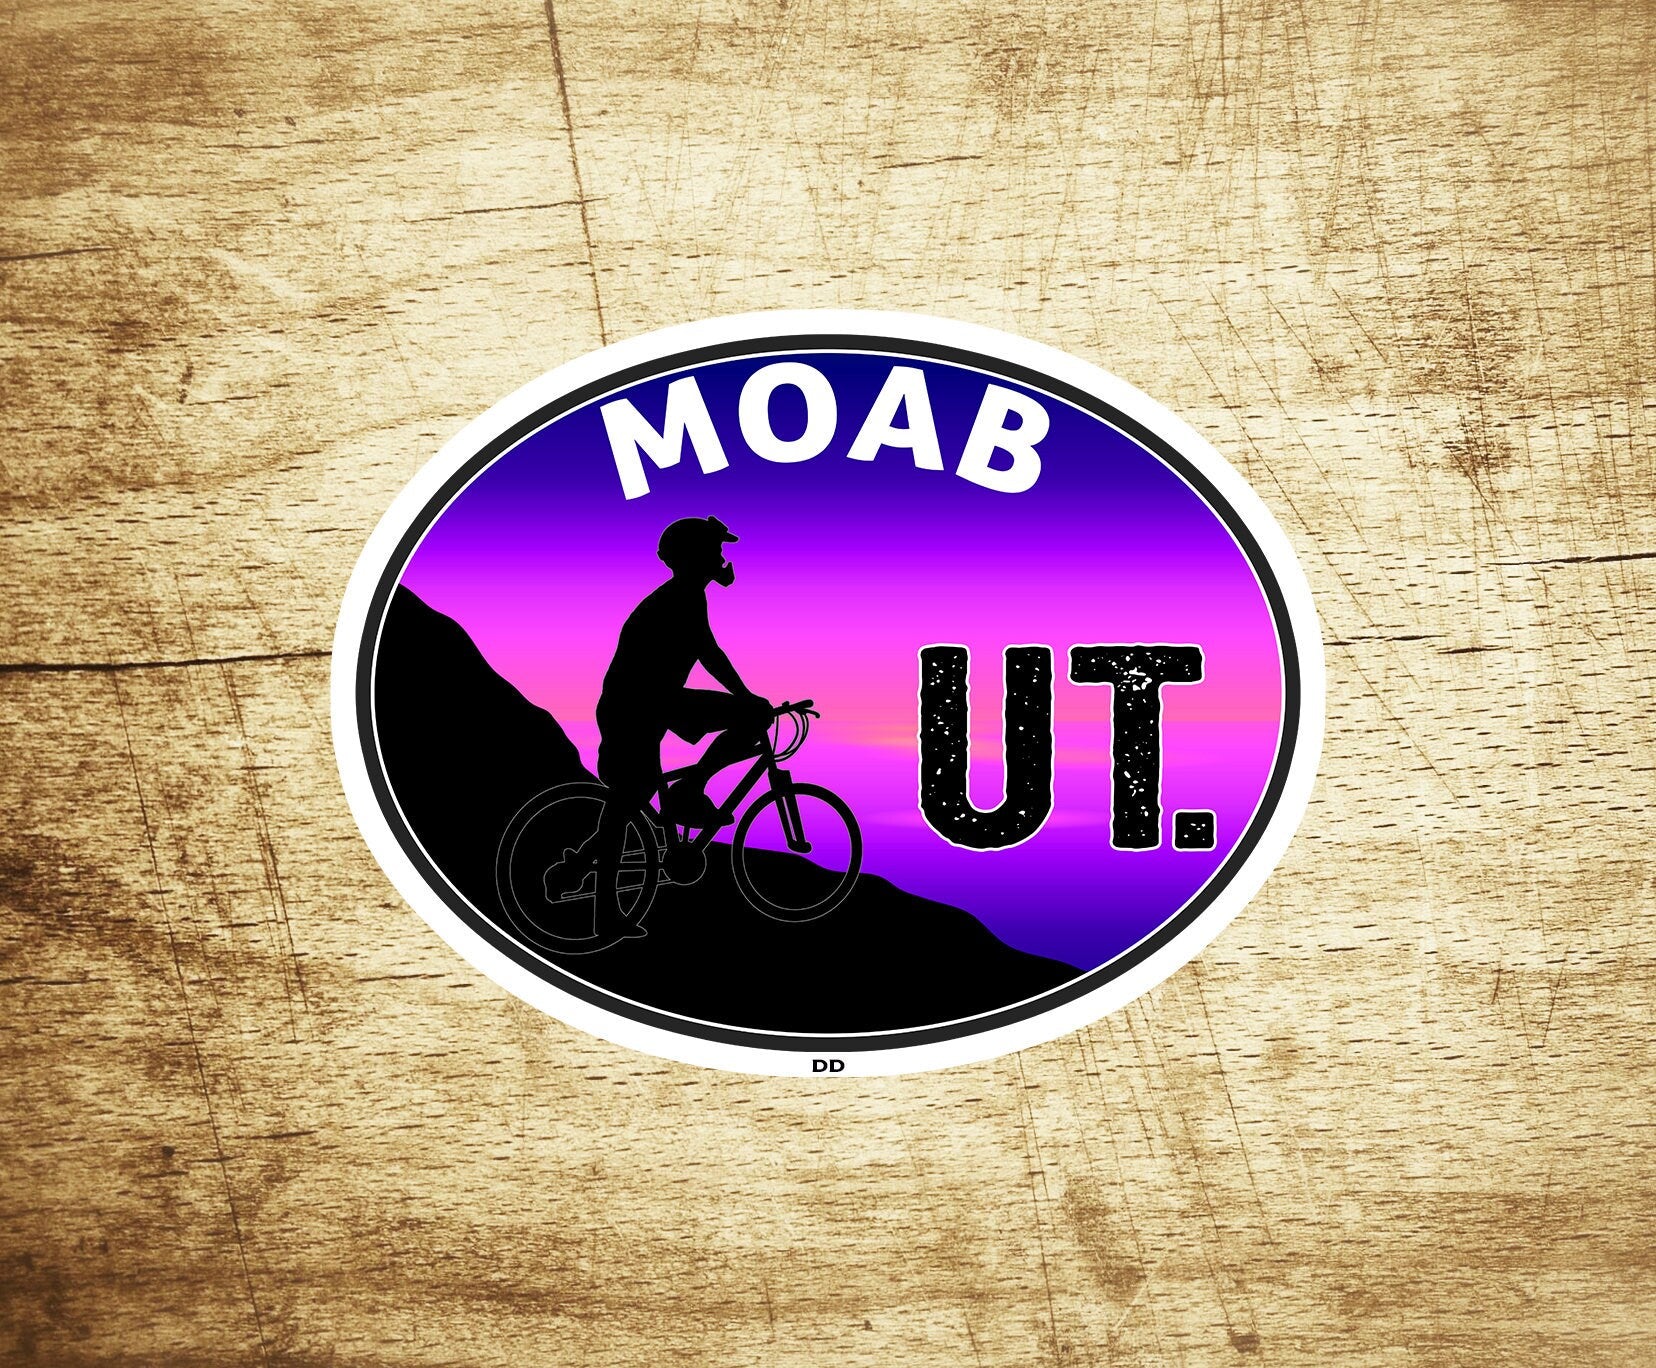 Moab Utah Arches Canyonlands Decal 3 5/8" x 2 3/4" Sticker National Park Mountain Bike